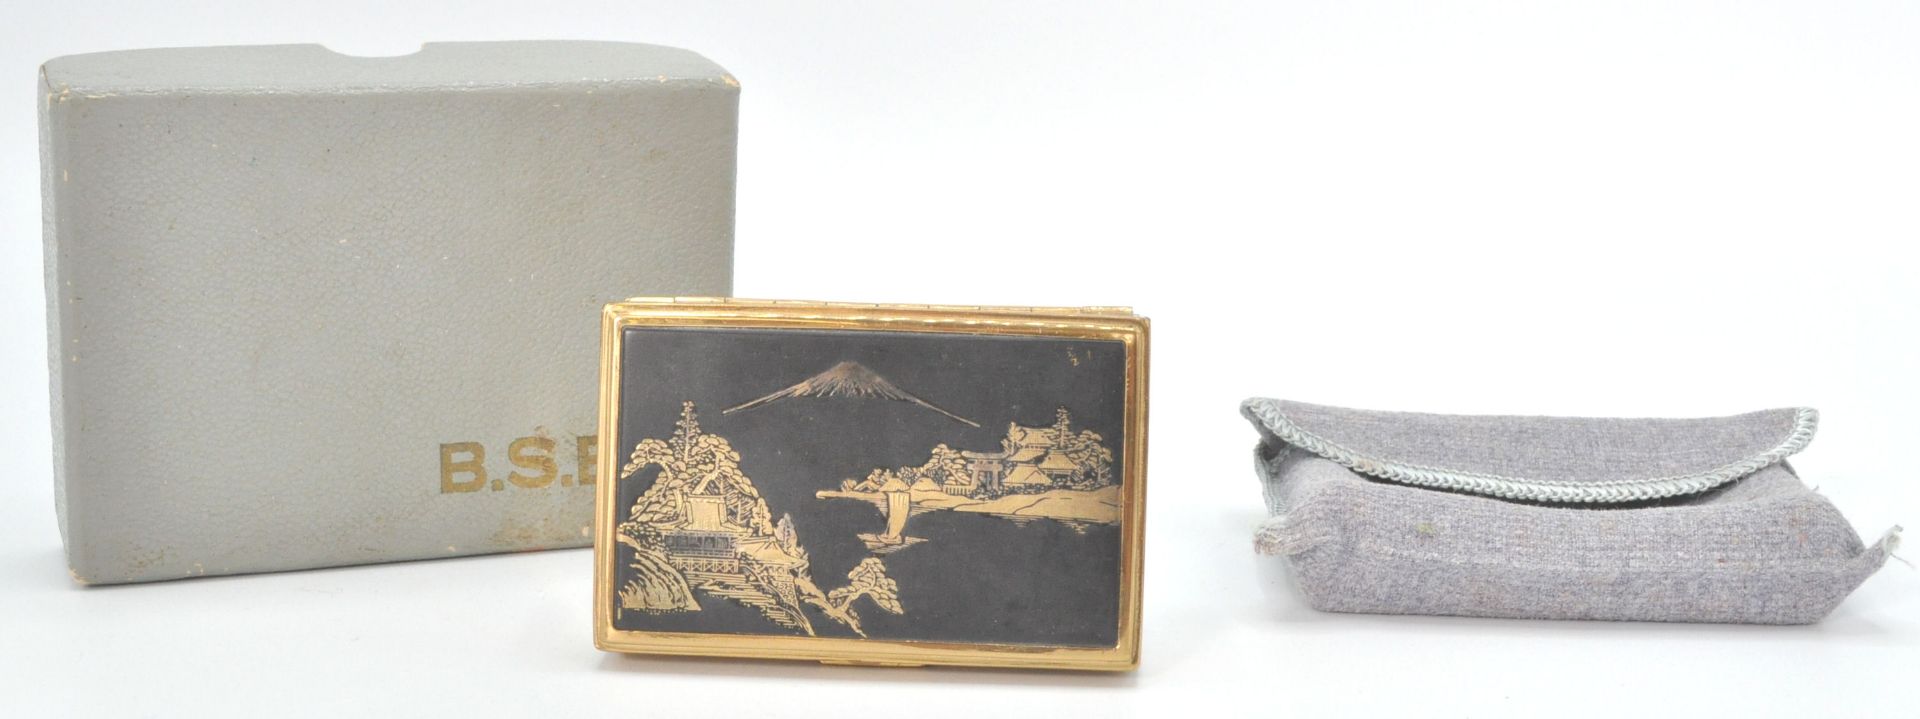 A good vintage 20th Century musical compact by B.S.B having a Japanese scene atop with mount Fuji in